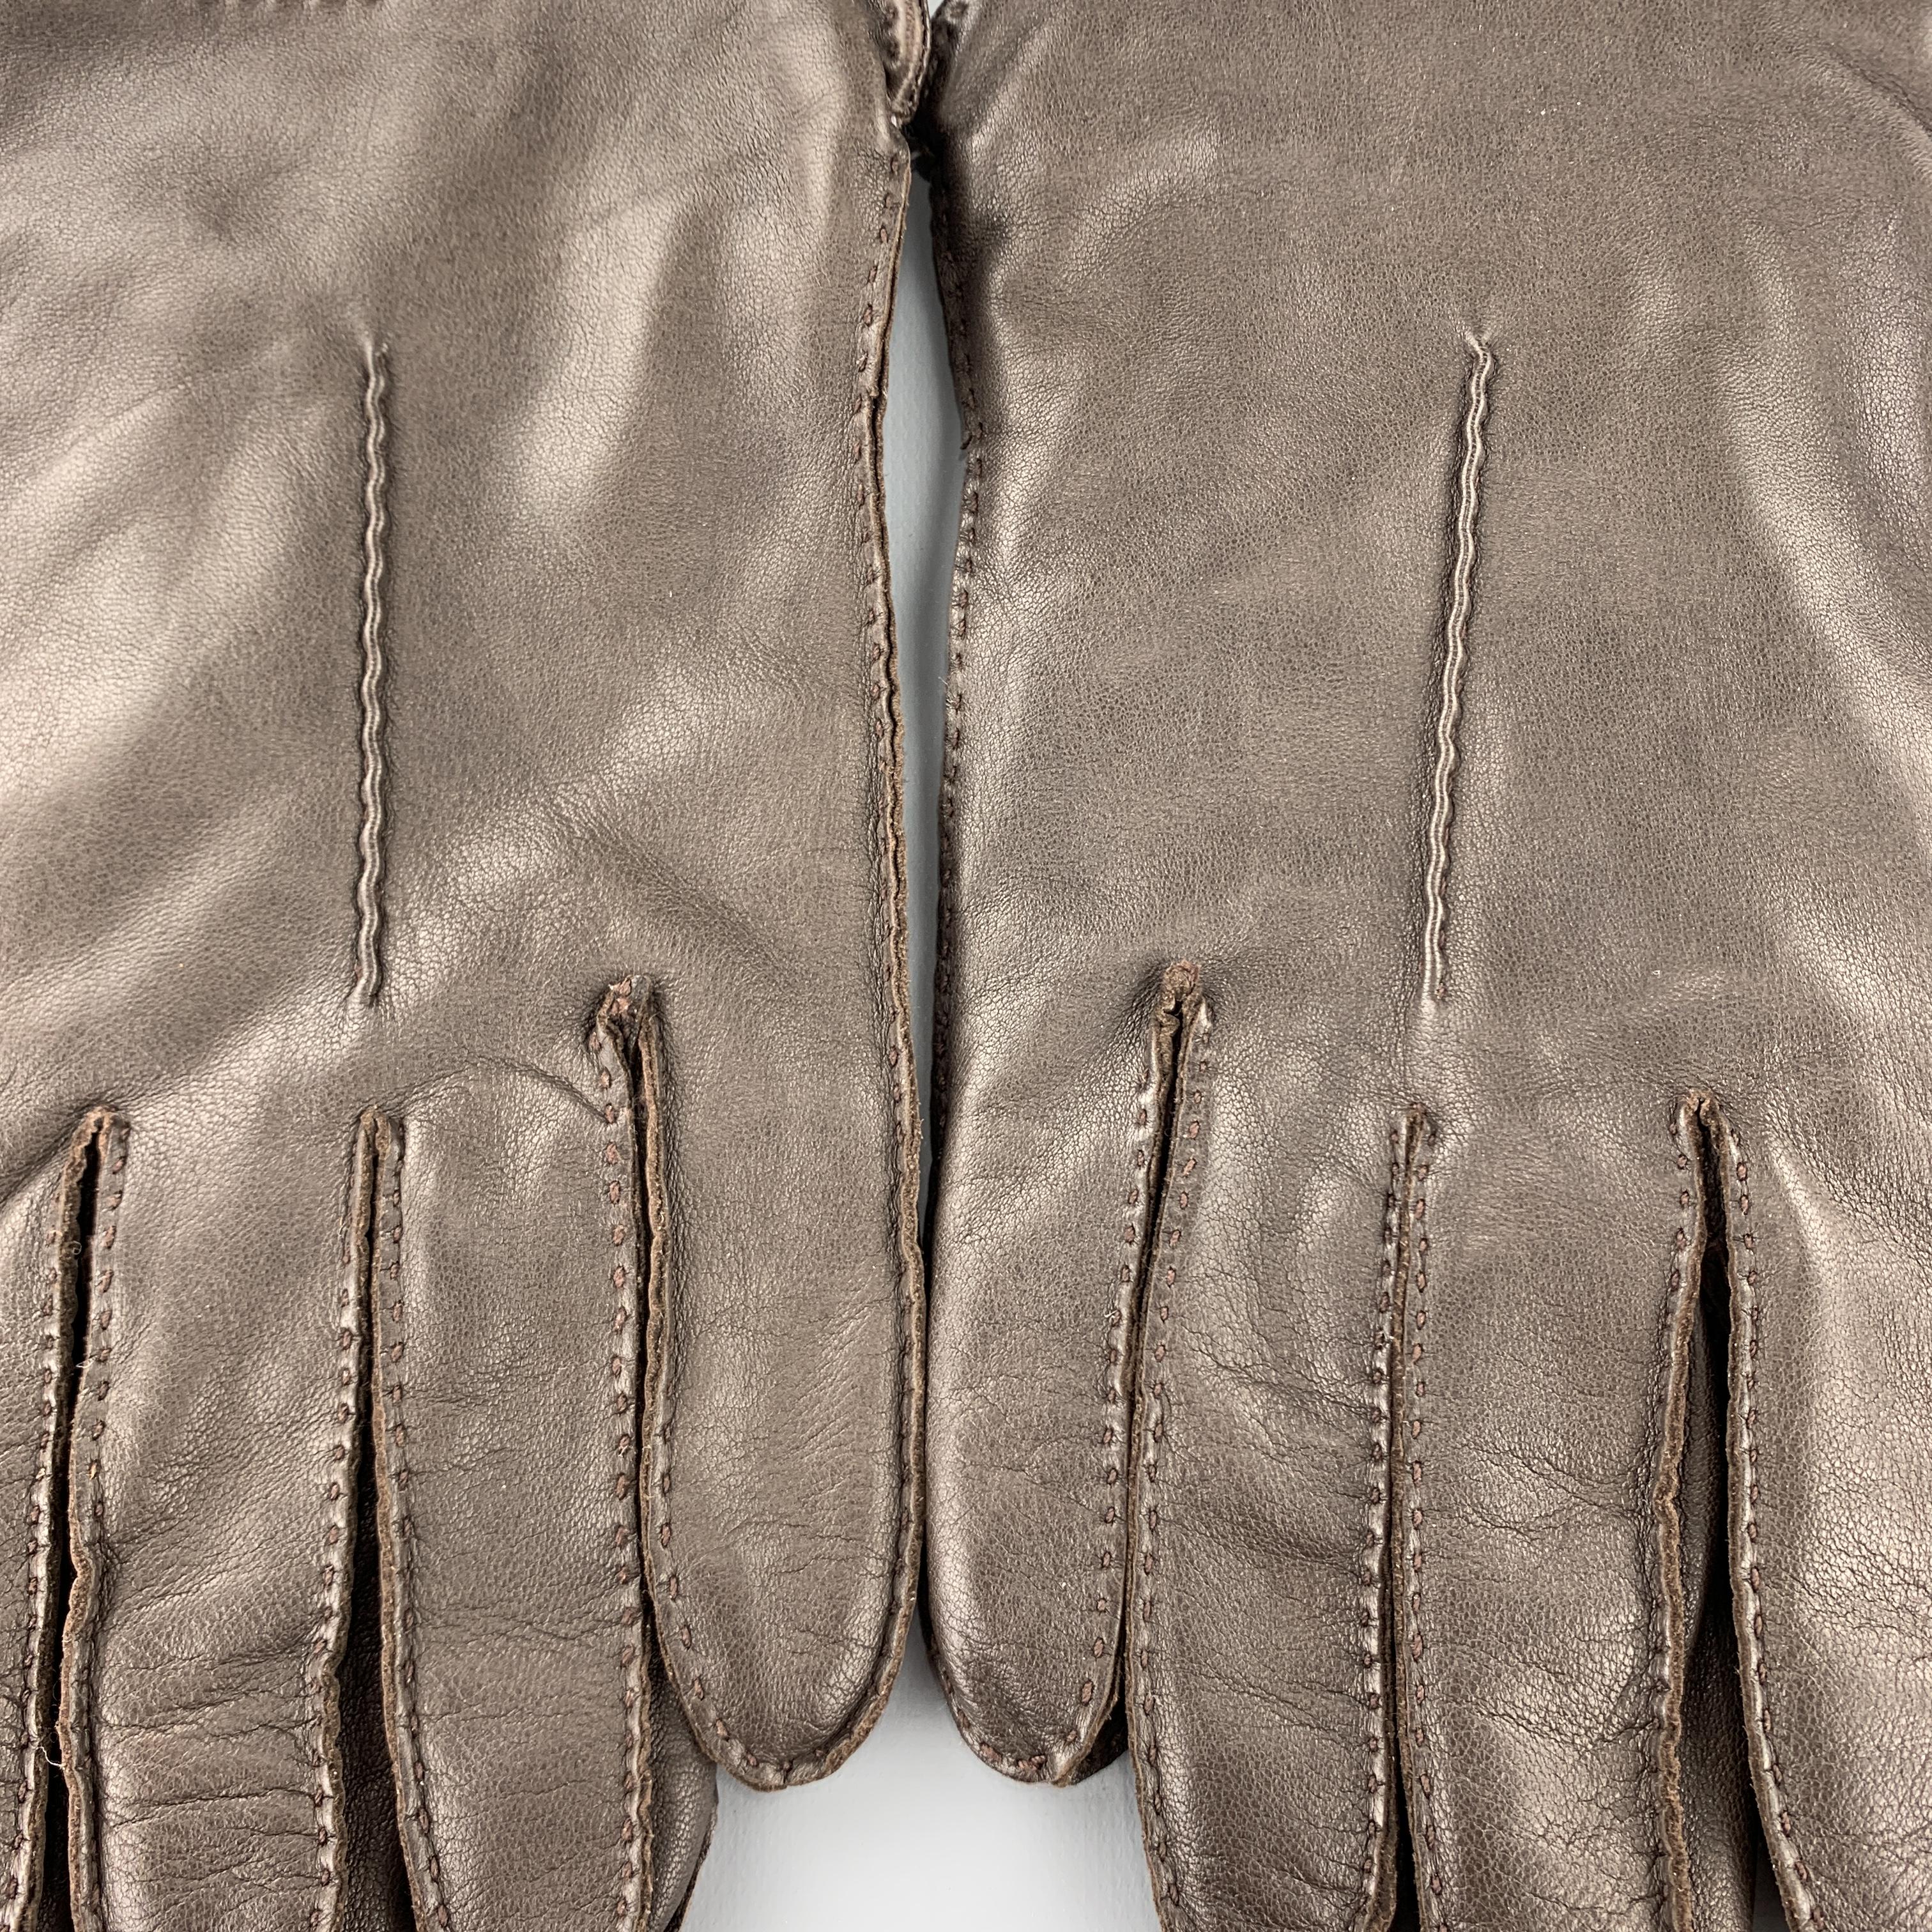 Vintage PICKETT gloves come in dark brown leather with cashmere wool blend knit liner. Made in England.

Excellent Pre-Owned Condition.
Marked: 9

Width: 4.25 in.
Length: 9.5 in.